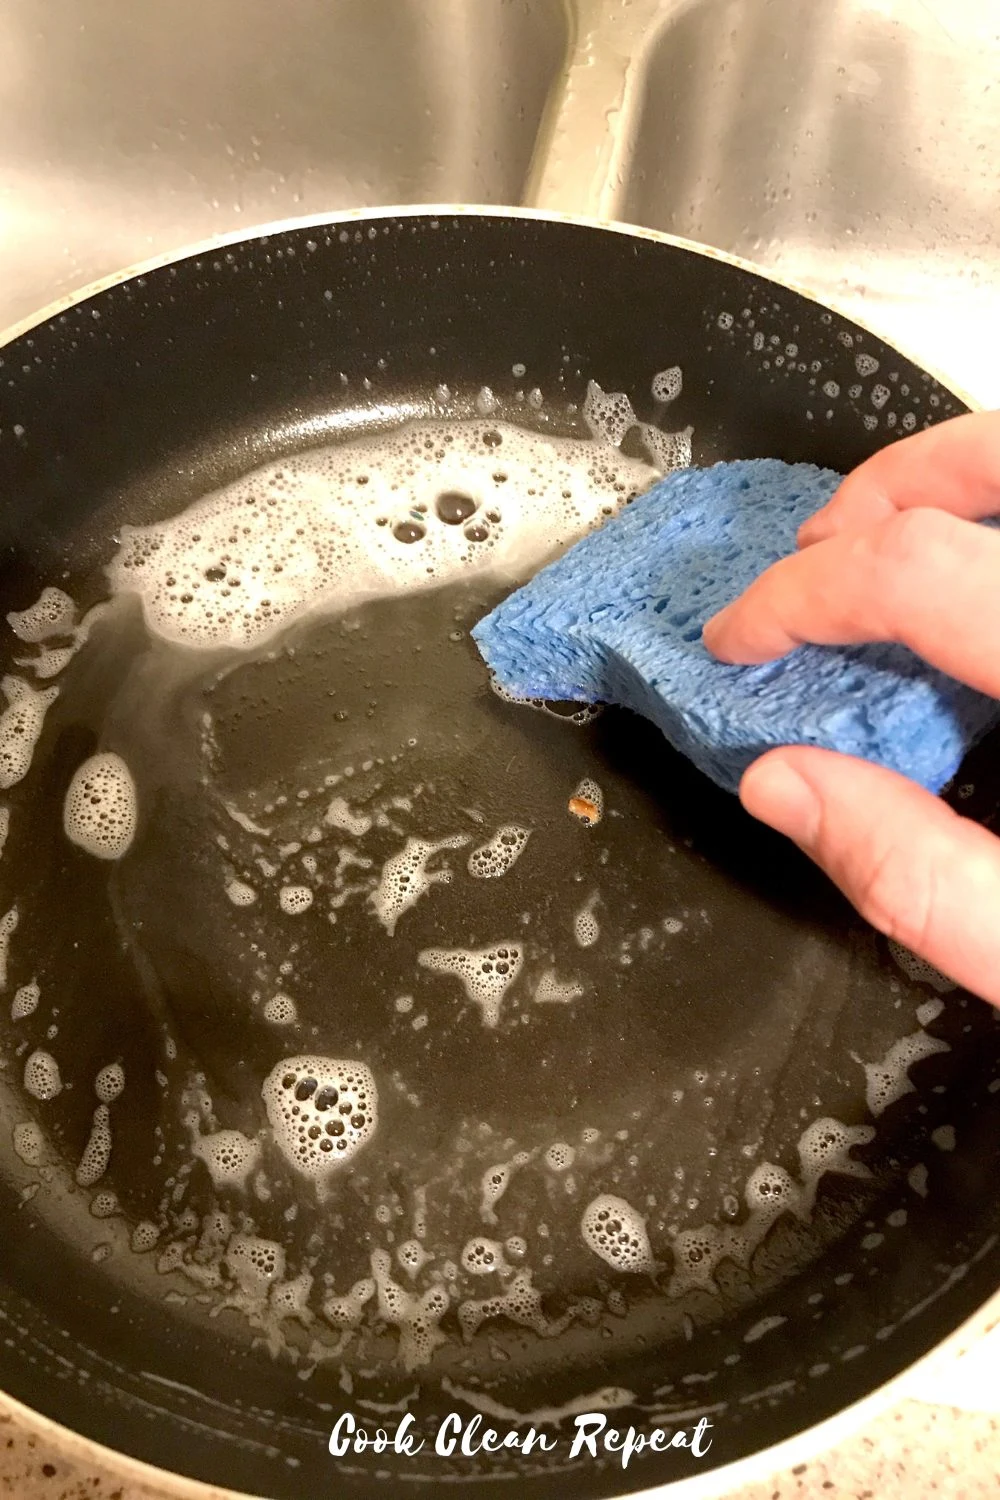 Hand scrubbing the baking pan with soap and water